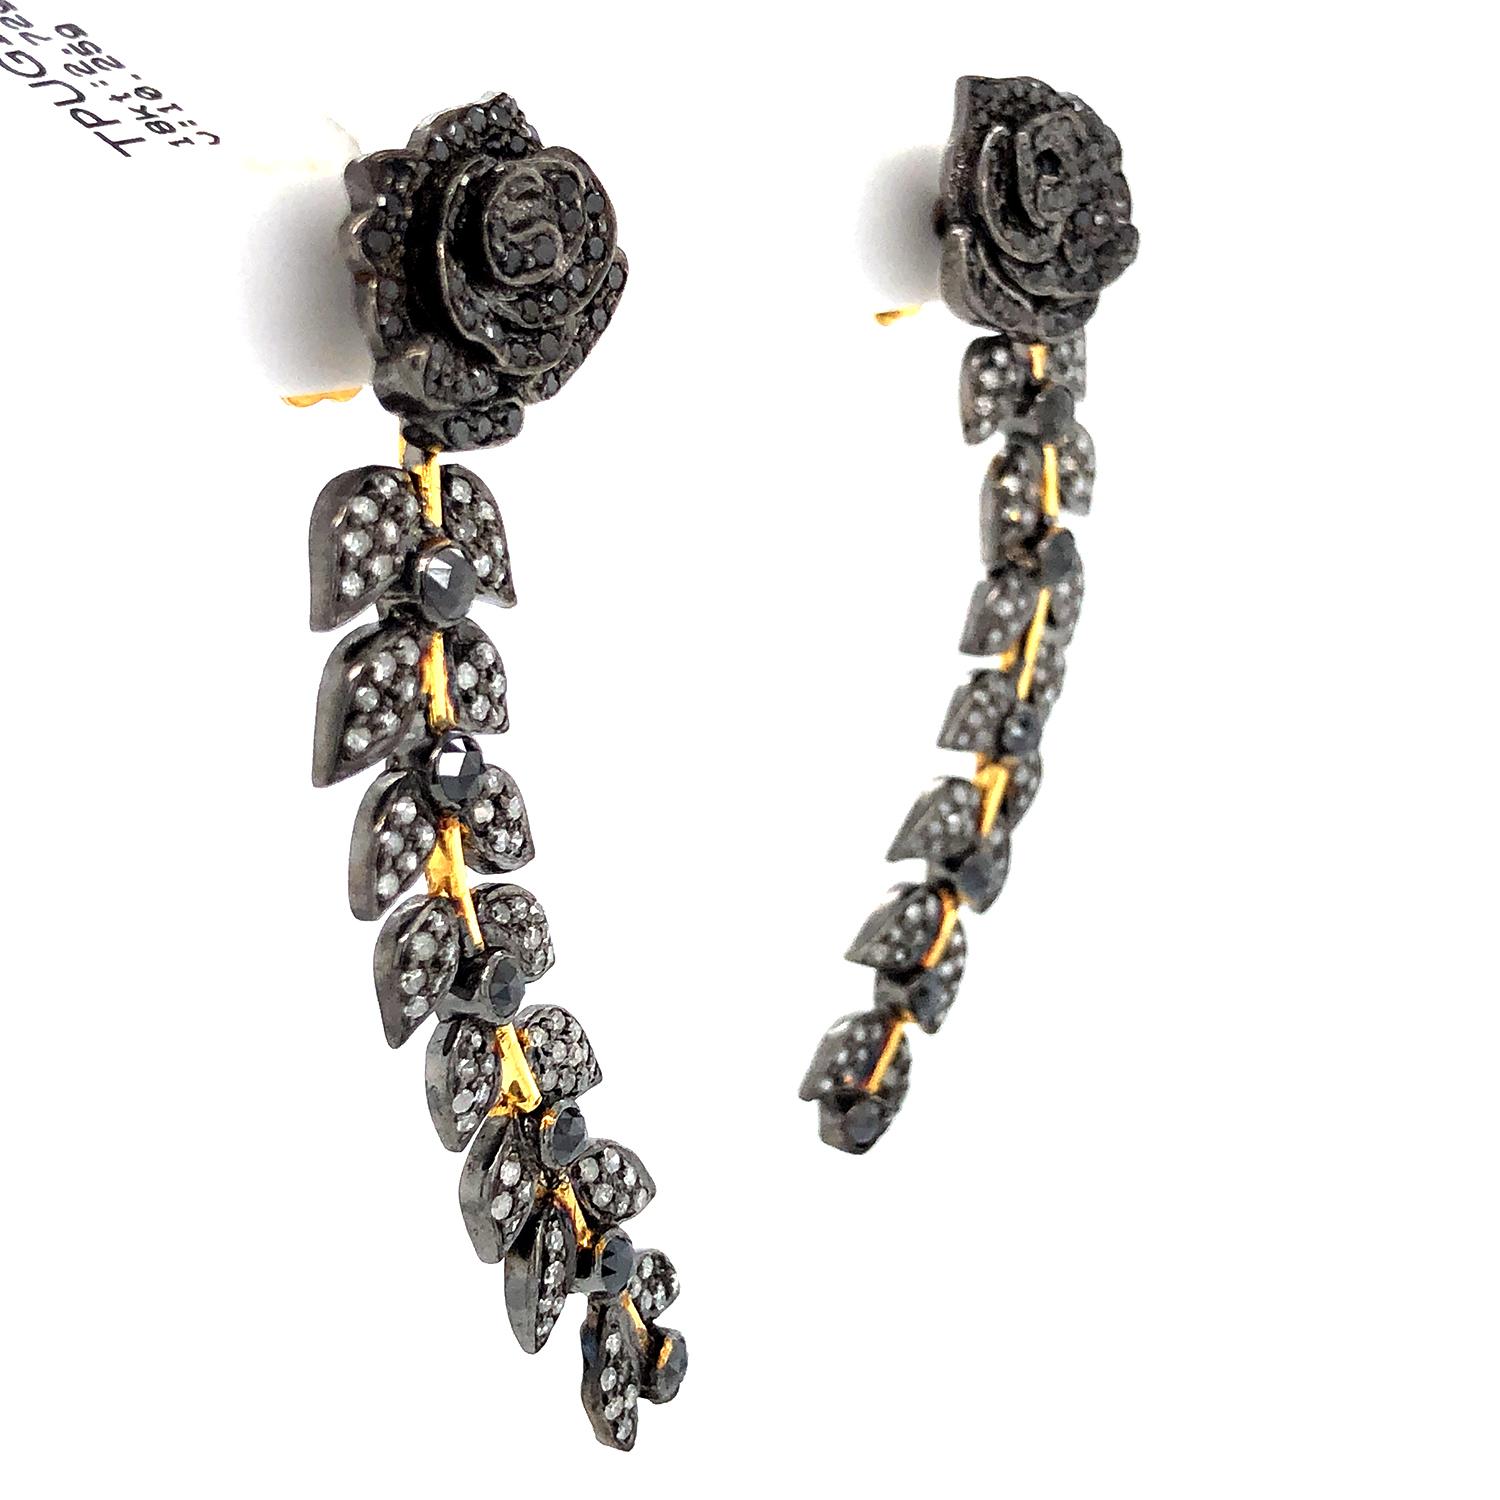 Art Deco Flower With Leaf Shaped Earrings With Diamonds Made In 18k Yellow Gold & Silver For Sale